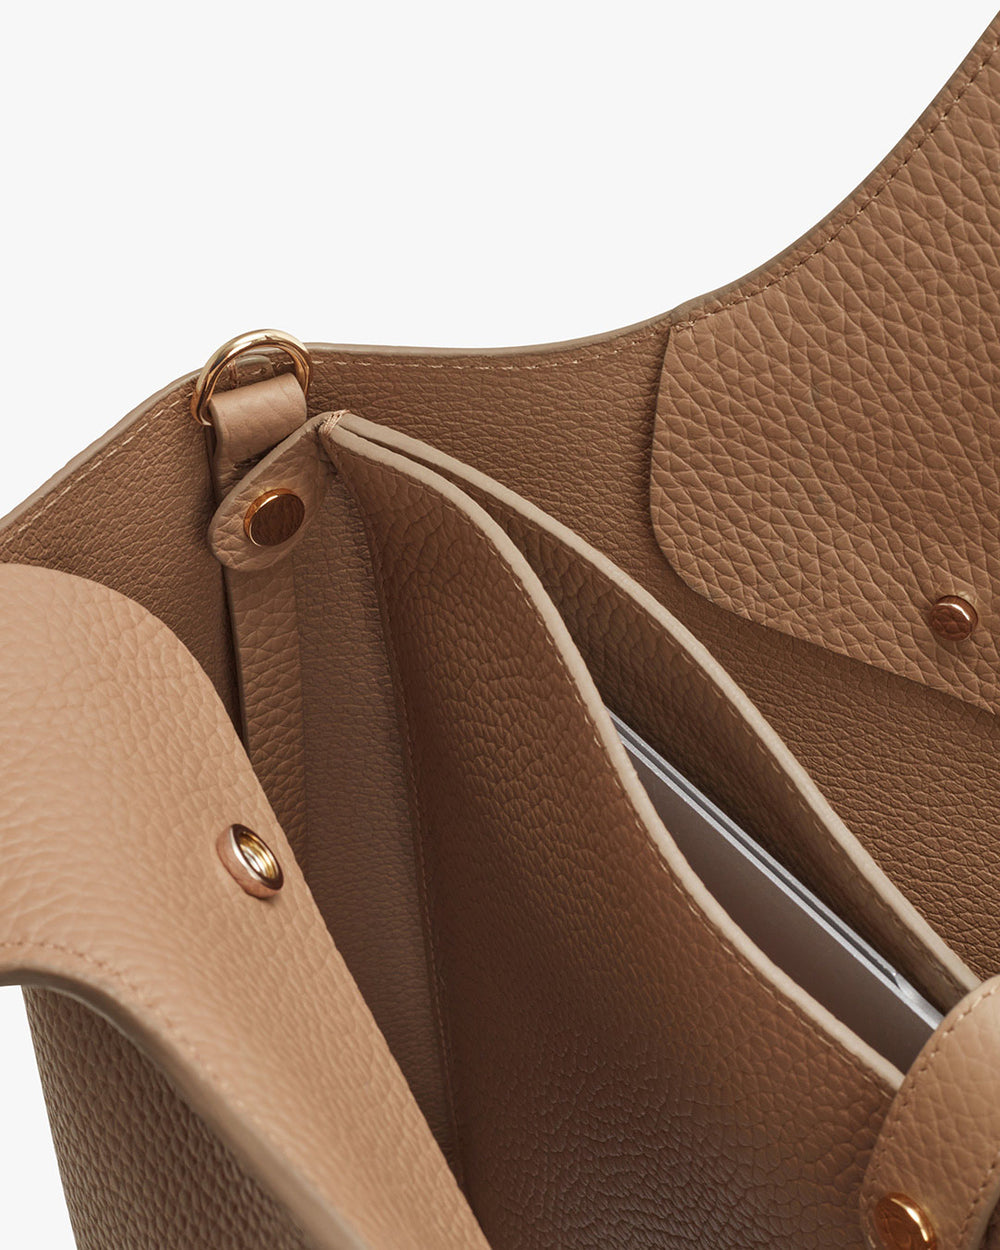 Close-up of an open handbag with visible interior and fasteners.